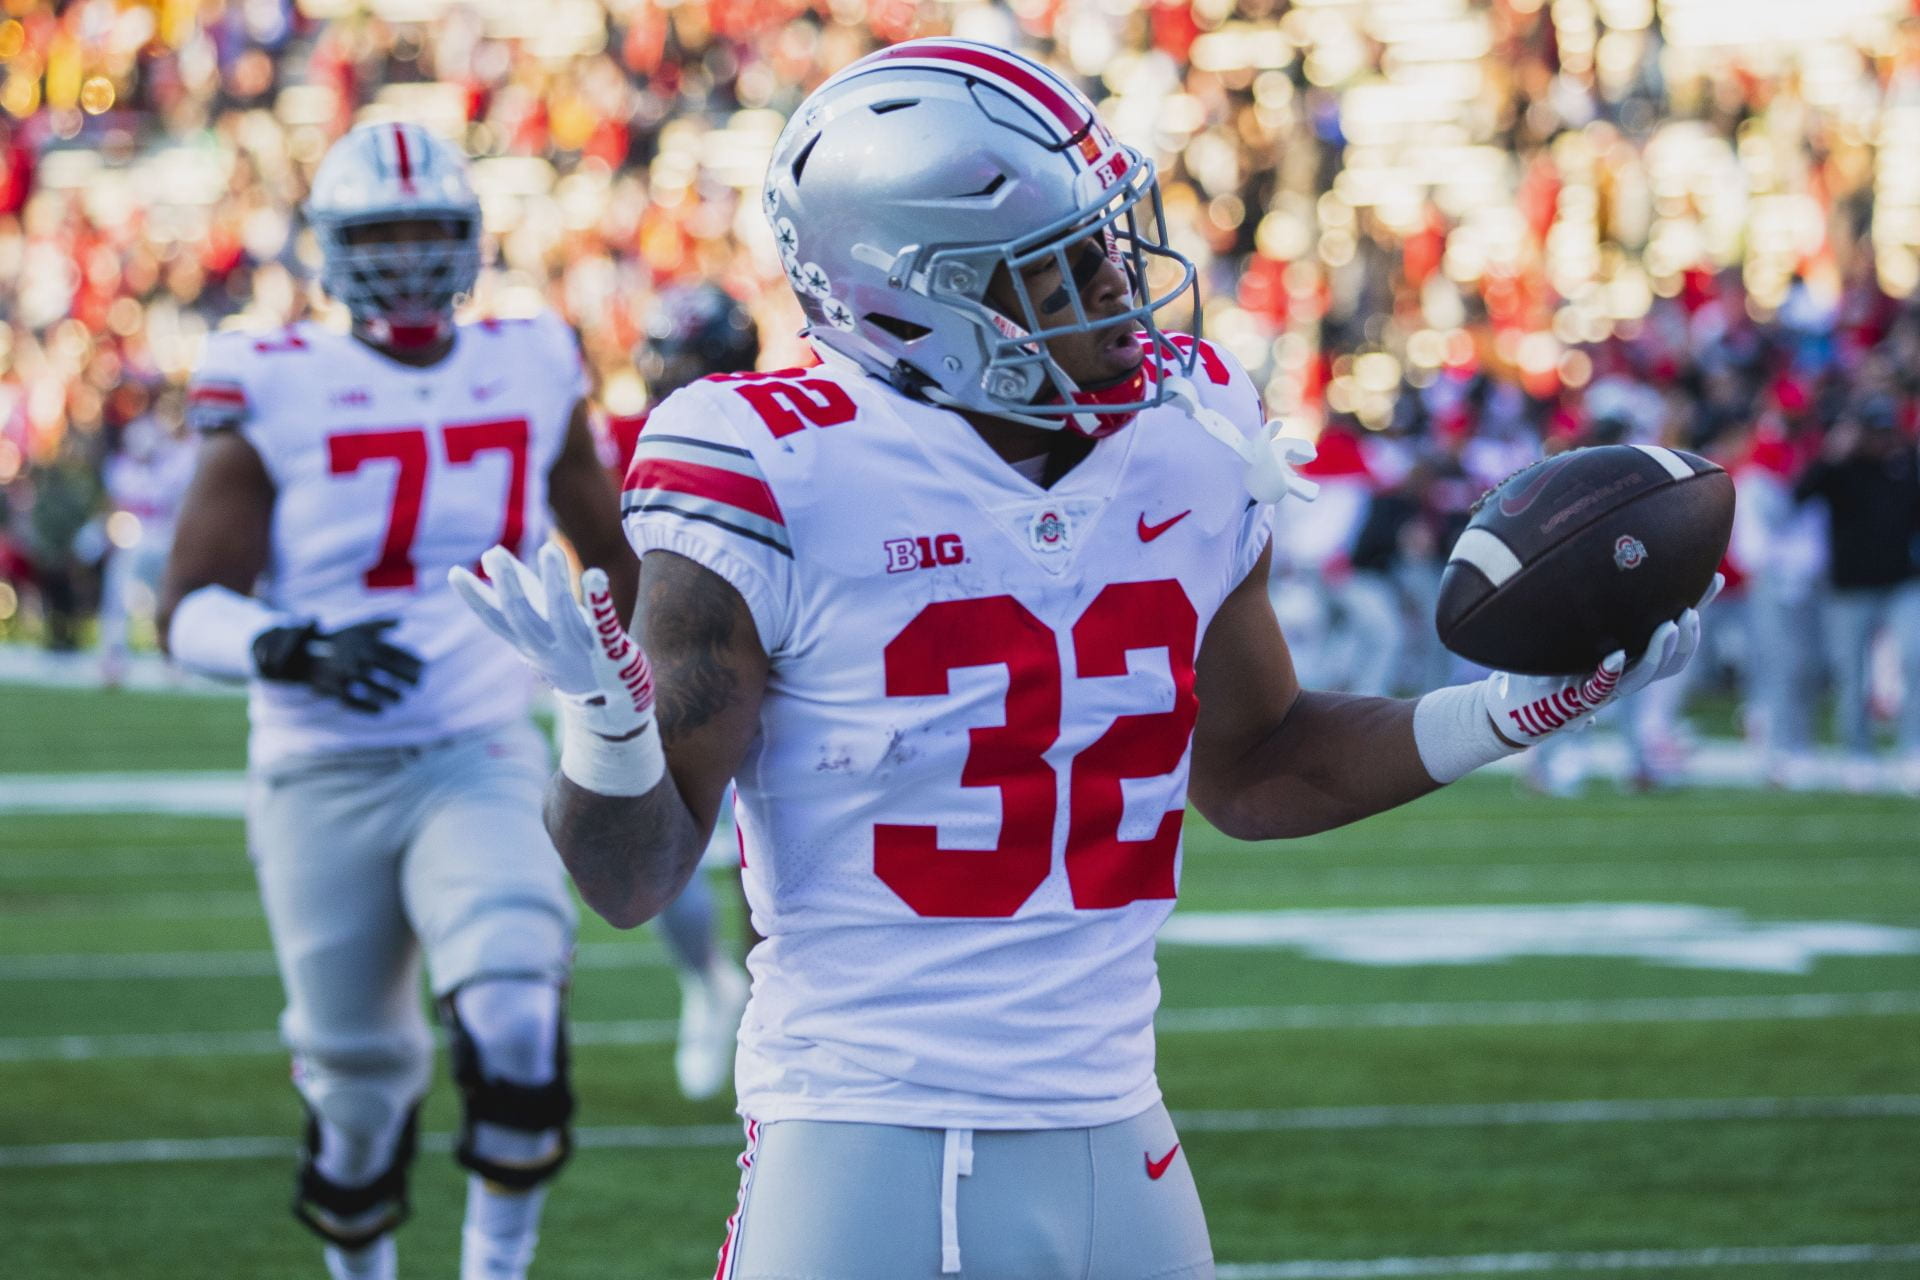 Ohio State football player with arms in shrug after touchdown